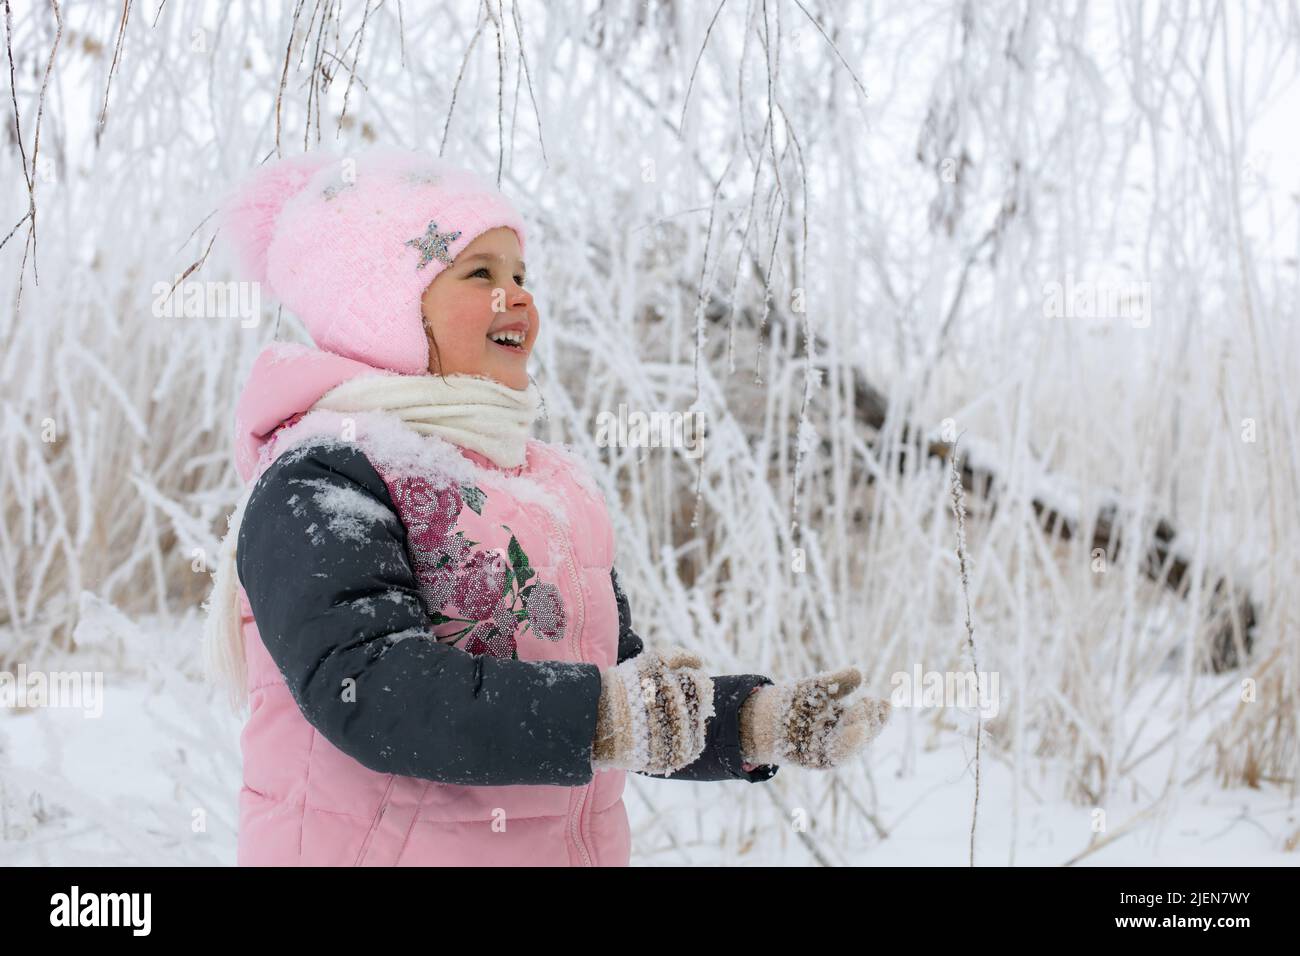 Little girl playing with snow outside dressed in warm winter clothes looking up and smiling with snowy tree branches in background. Winter walk in Stock Photo